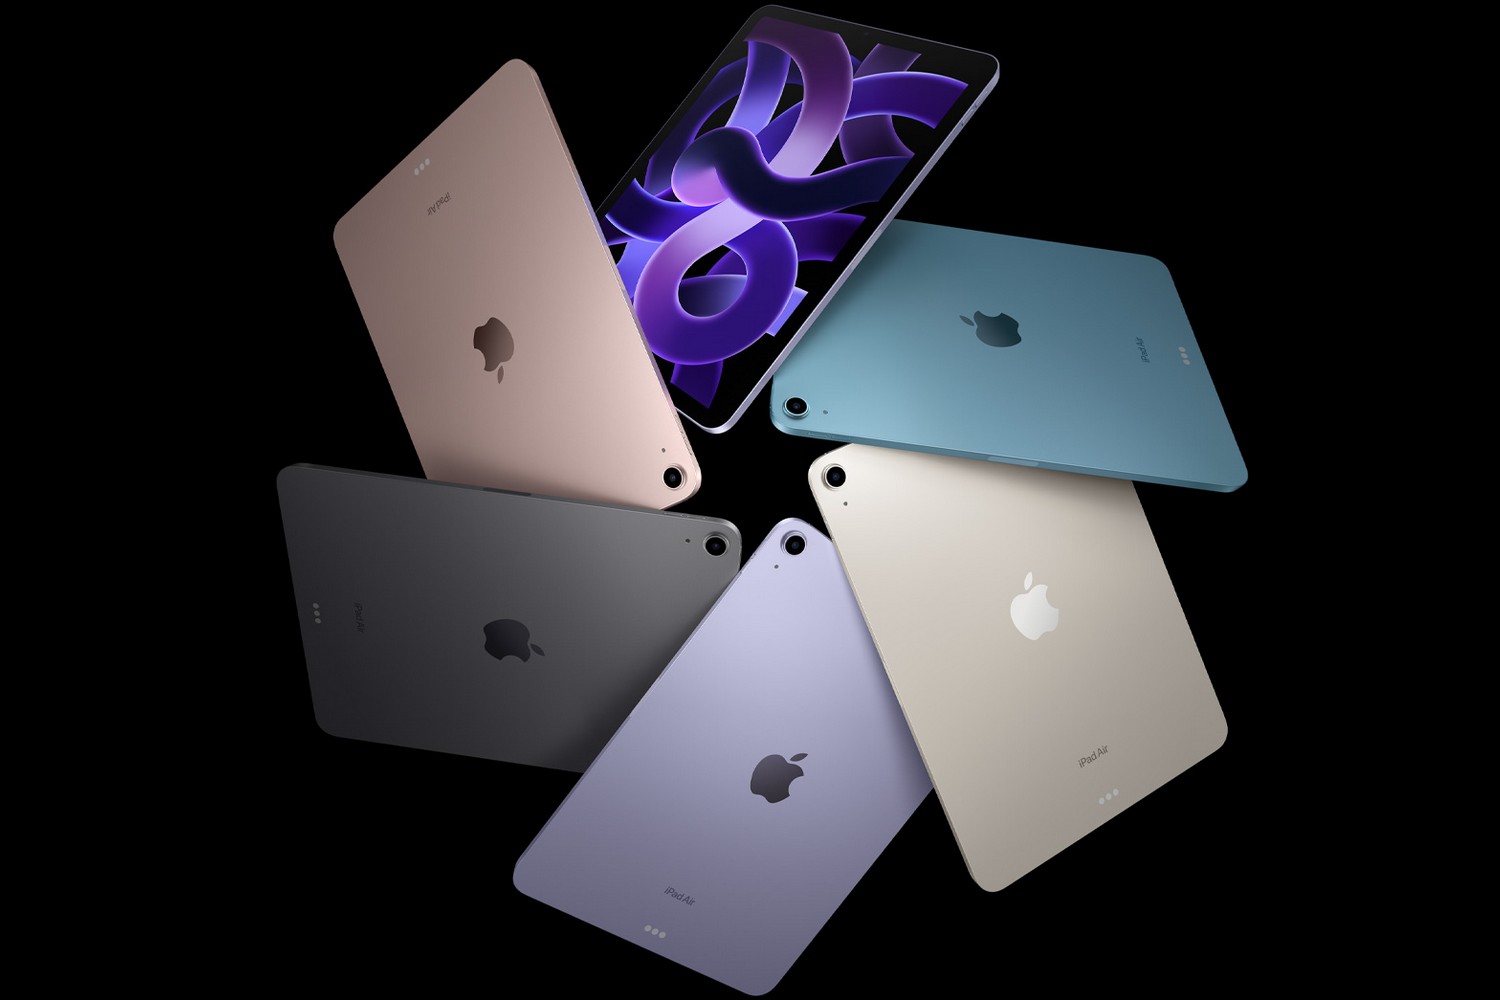 Six Apple iPad Air 5s fanned out in a circle, showing off the various colors of the chassis.